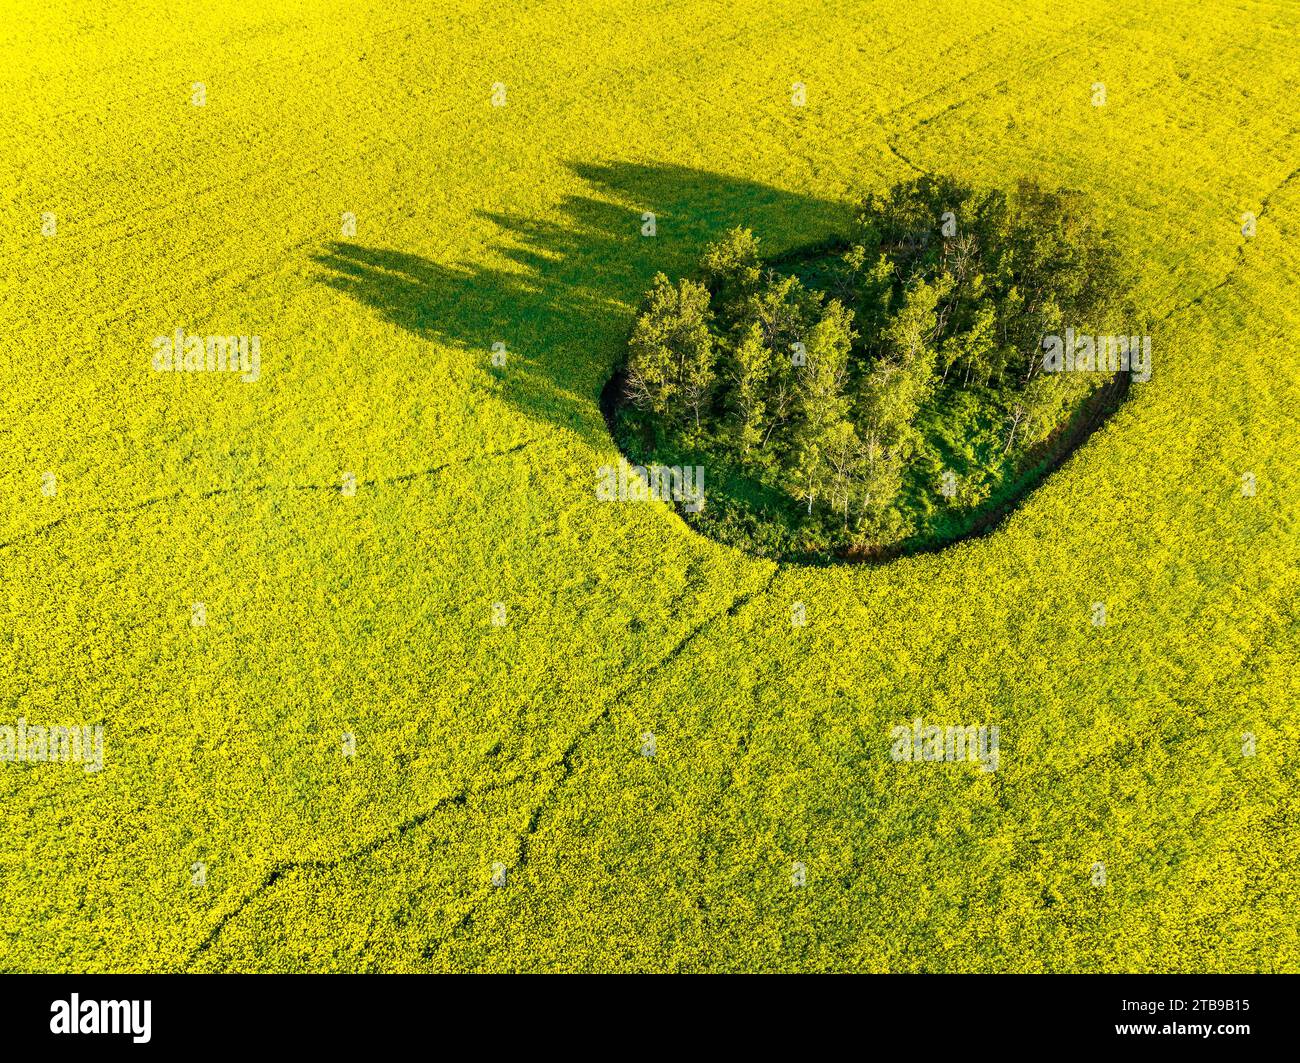 Aerial view, looking straight down at a grouping of green trees in a ripe golden canola field, west of Calgary, Alberta; Alberta, Canada Stock Photo